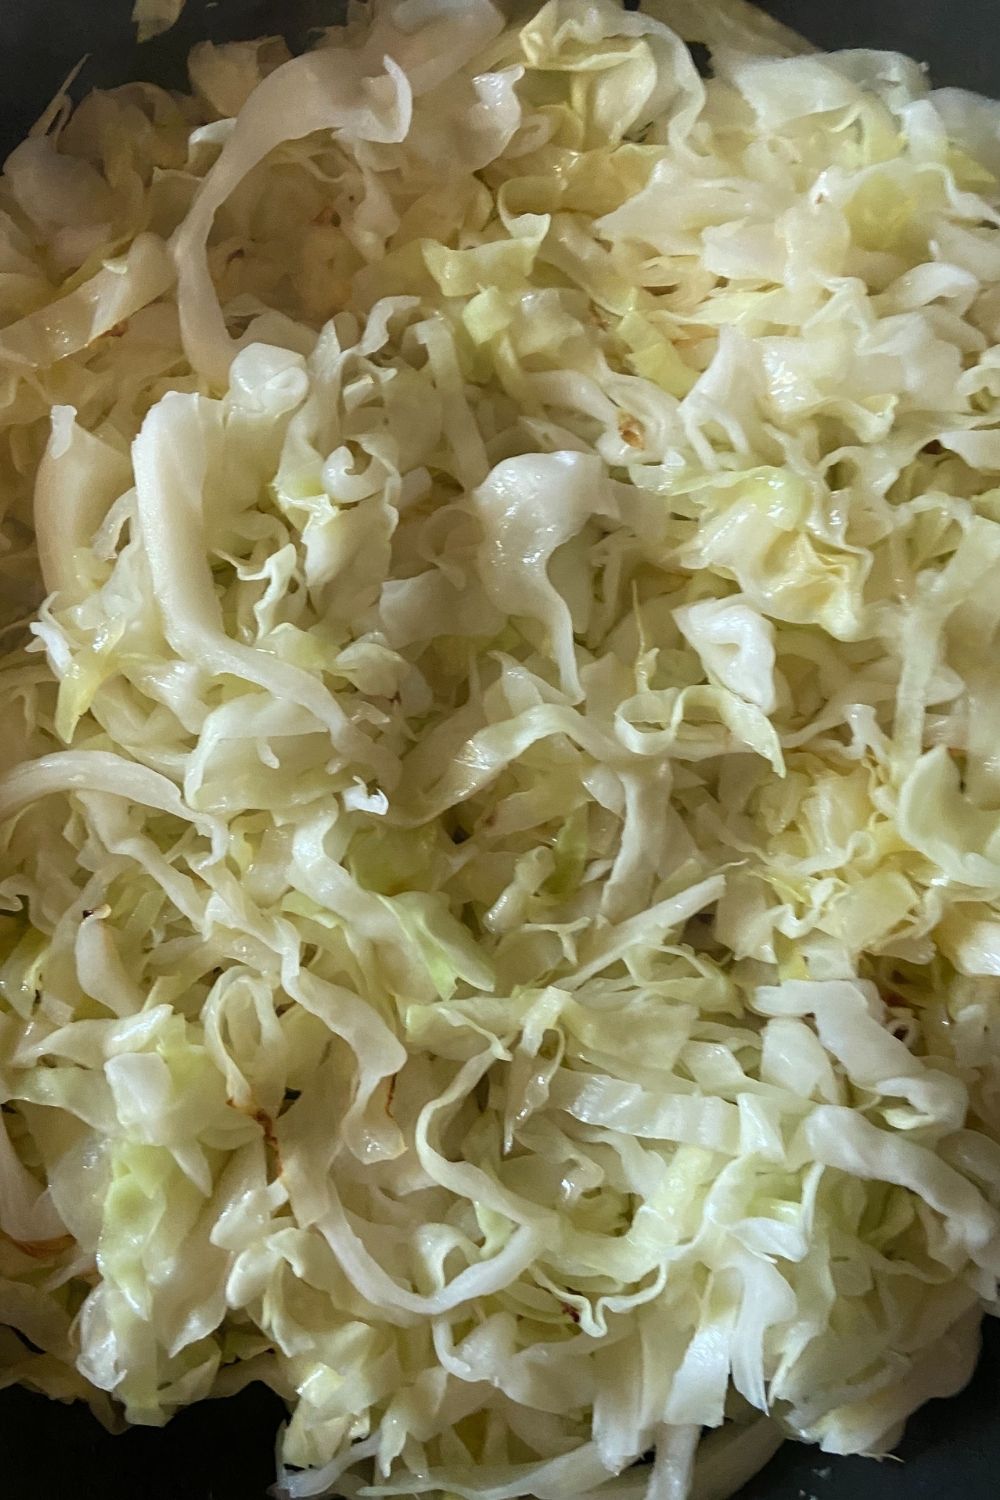 https://www.theseoldcookbooks.com/wp-content/uploads/2020/01/Creamy-Cabbage-A-Creamed-Cabbage-with-Heavy-Cream-6.jpg